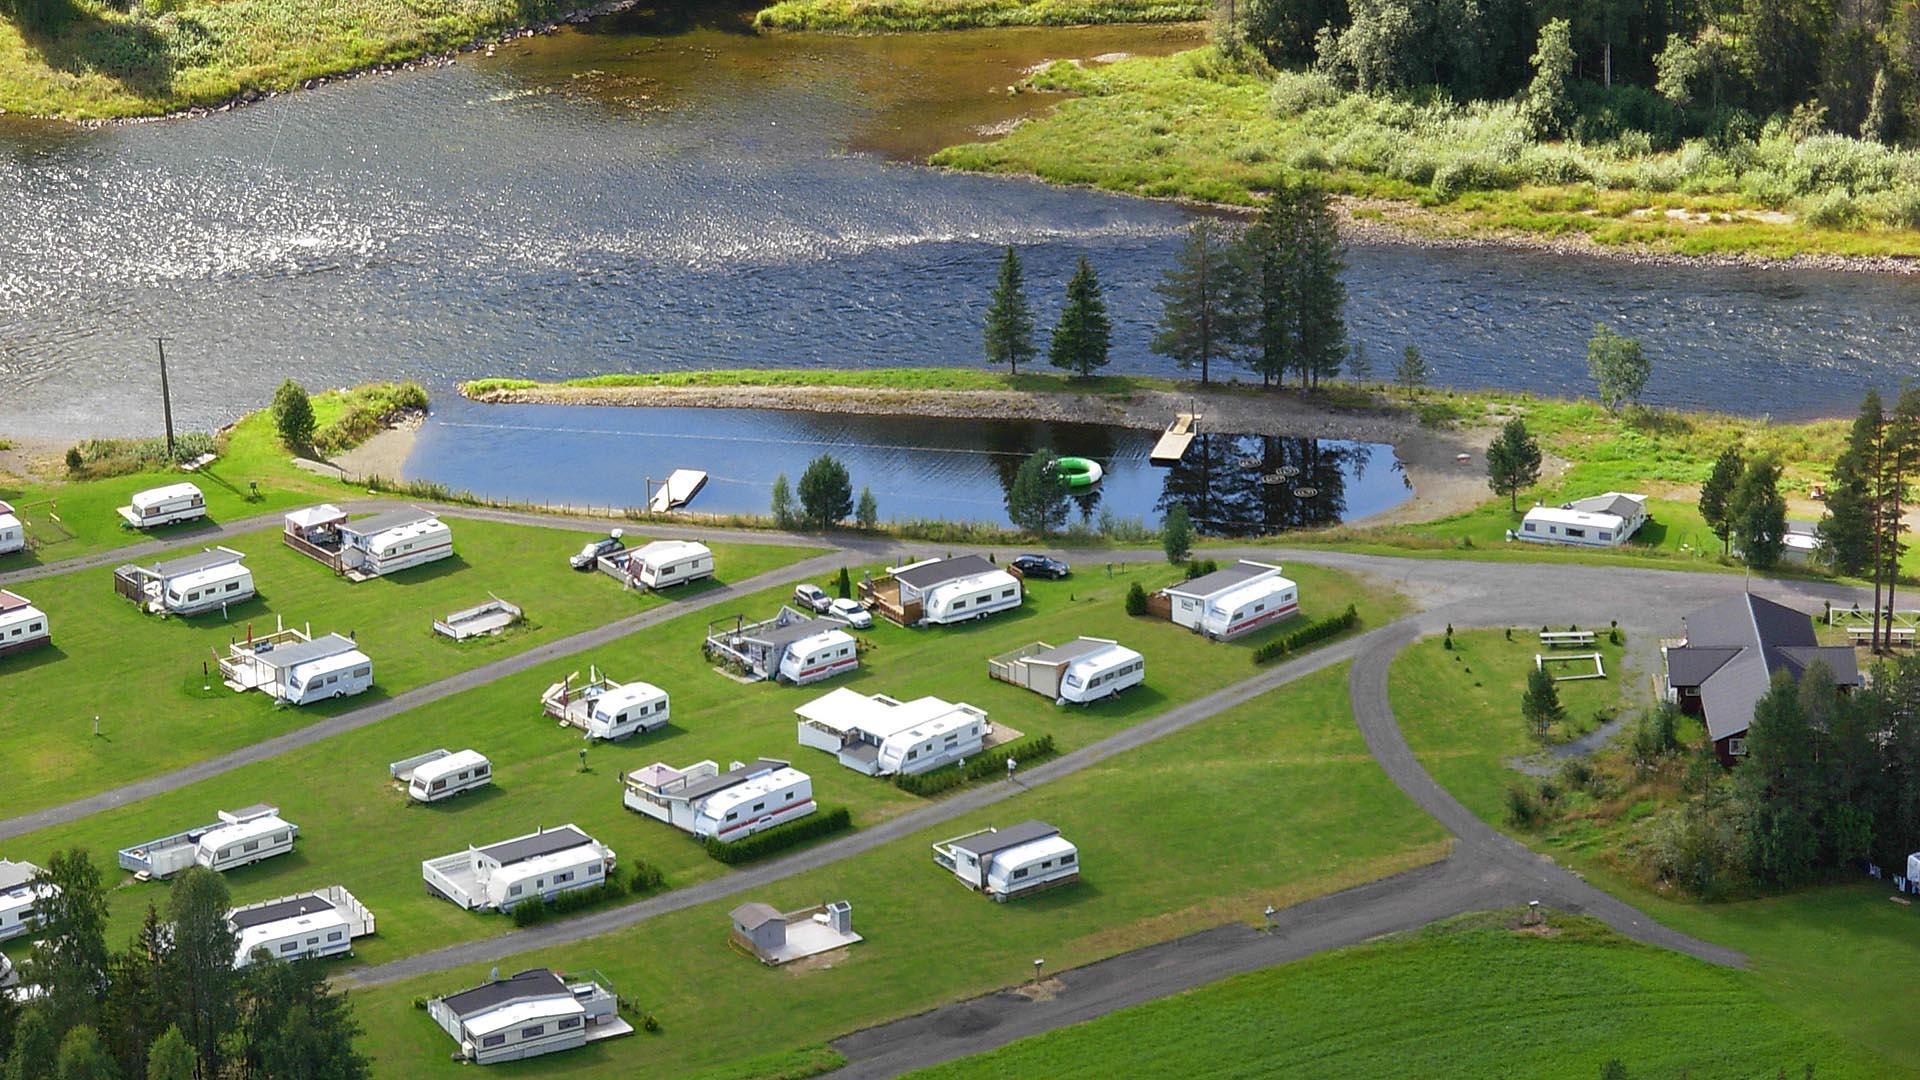 Aerial photo of a campground with motorhomes on a green lawn on a river bank